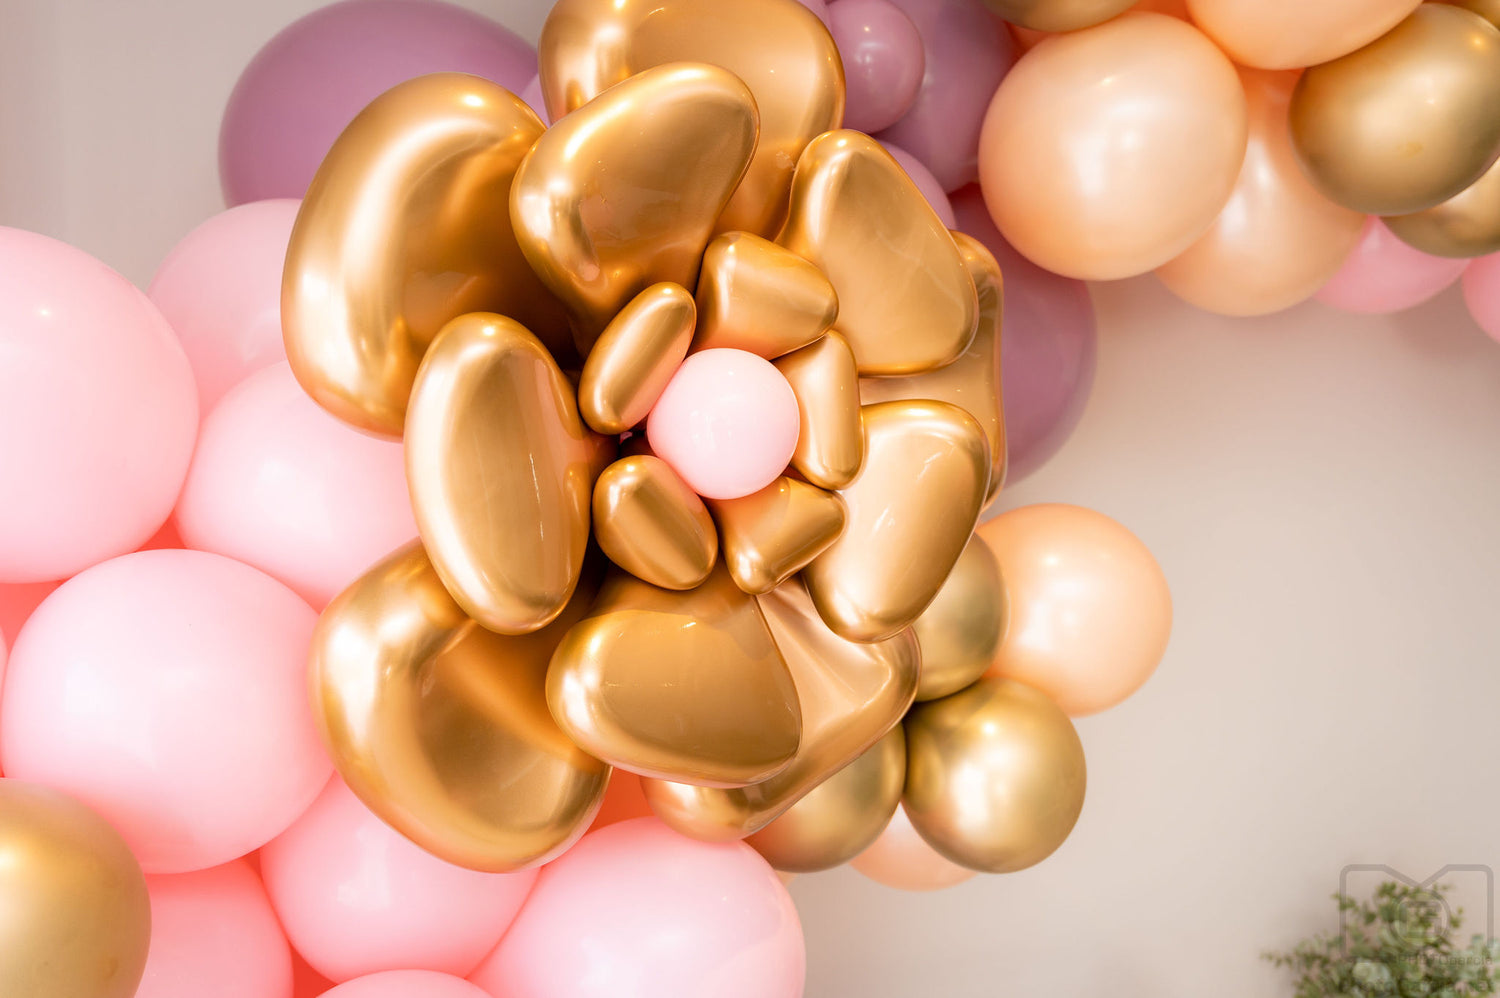 Gold flower made of balloons surrounded by pink and purple balloons.k